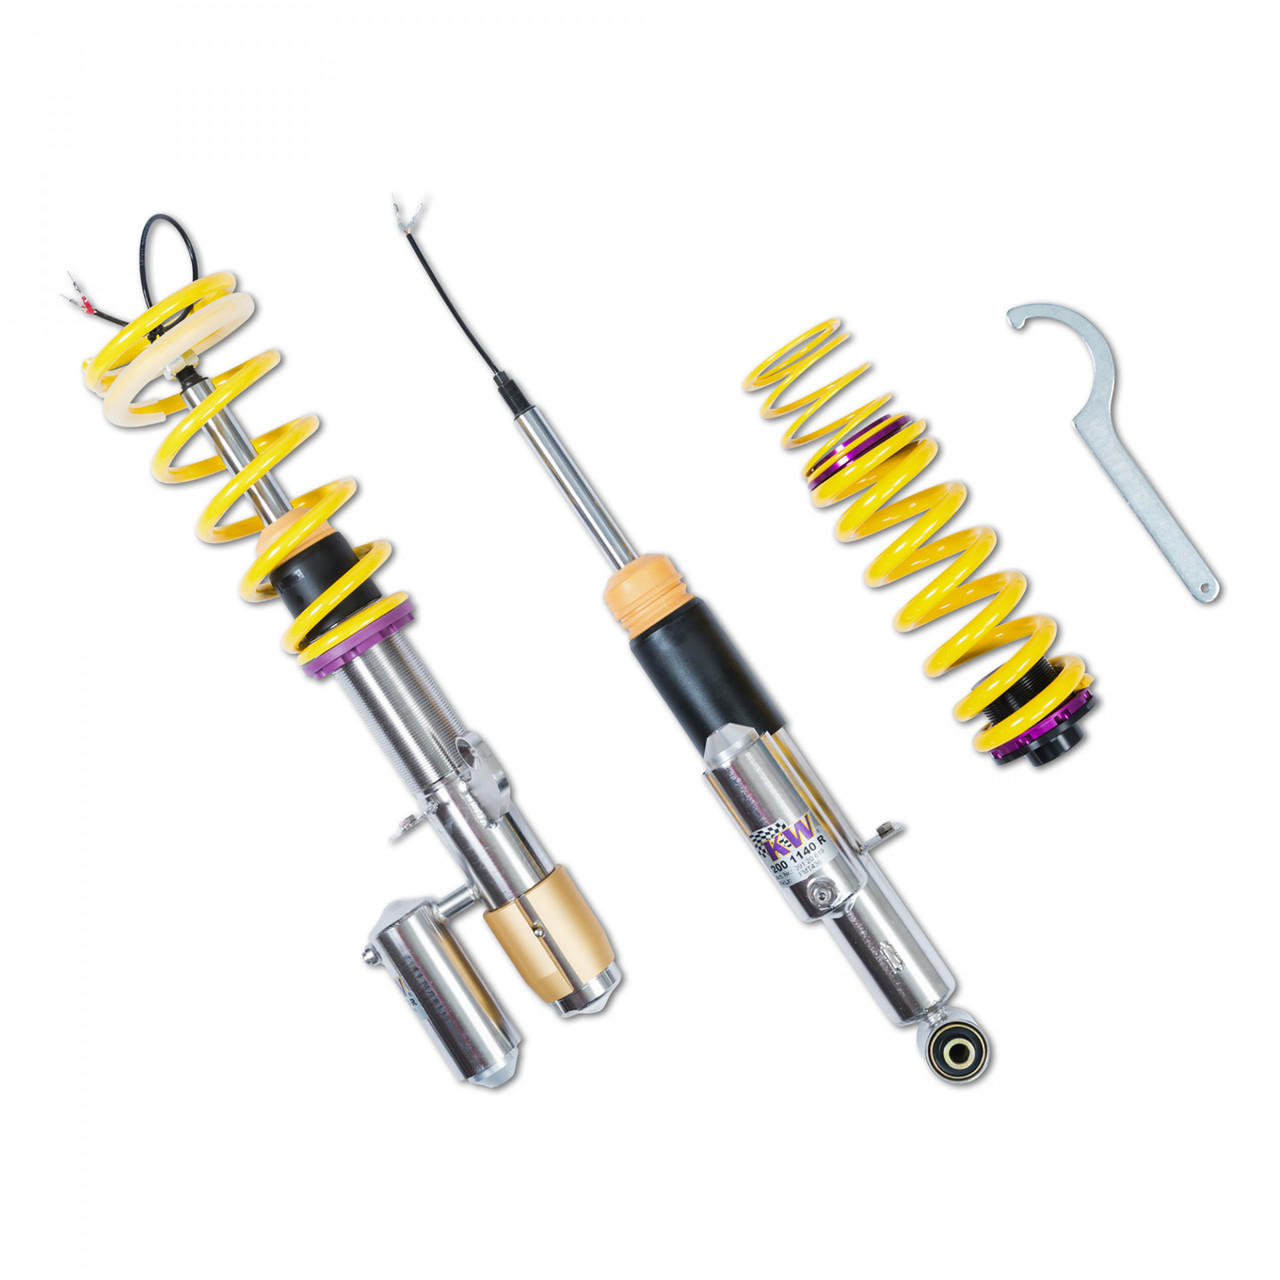 KW DDC ECU Coilovers for F80 M3 & F82 M4 Coupe